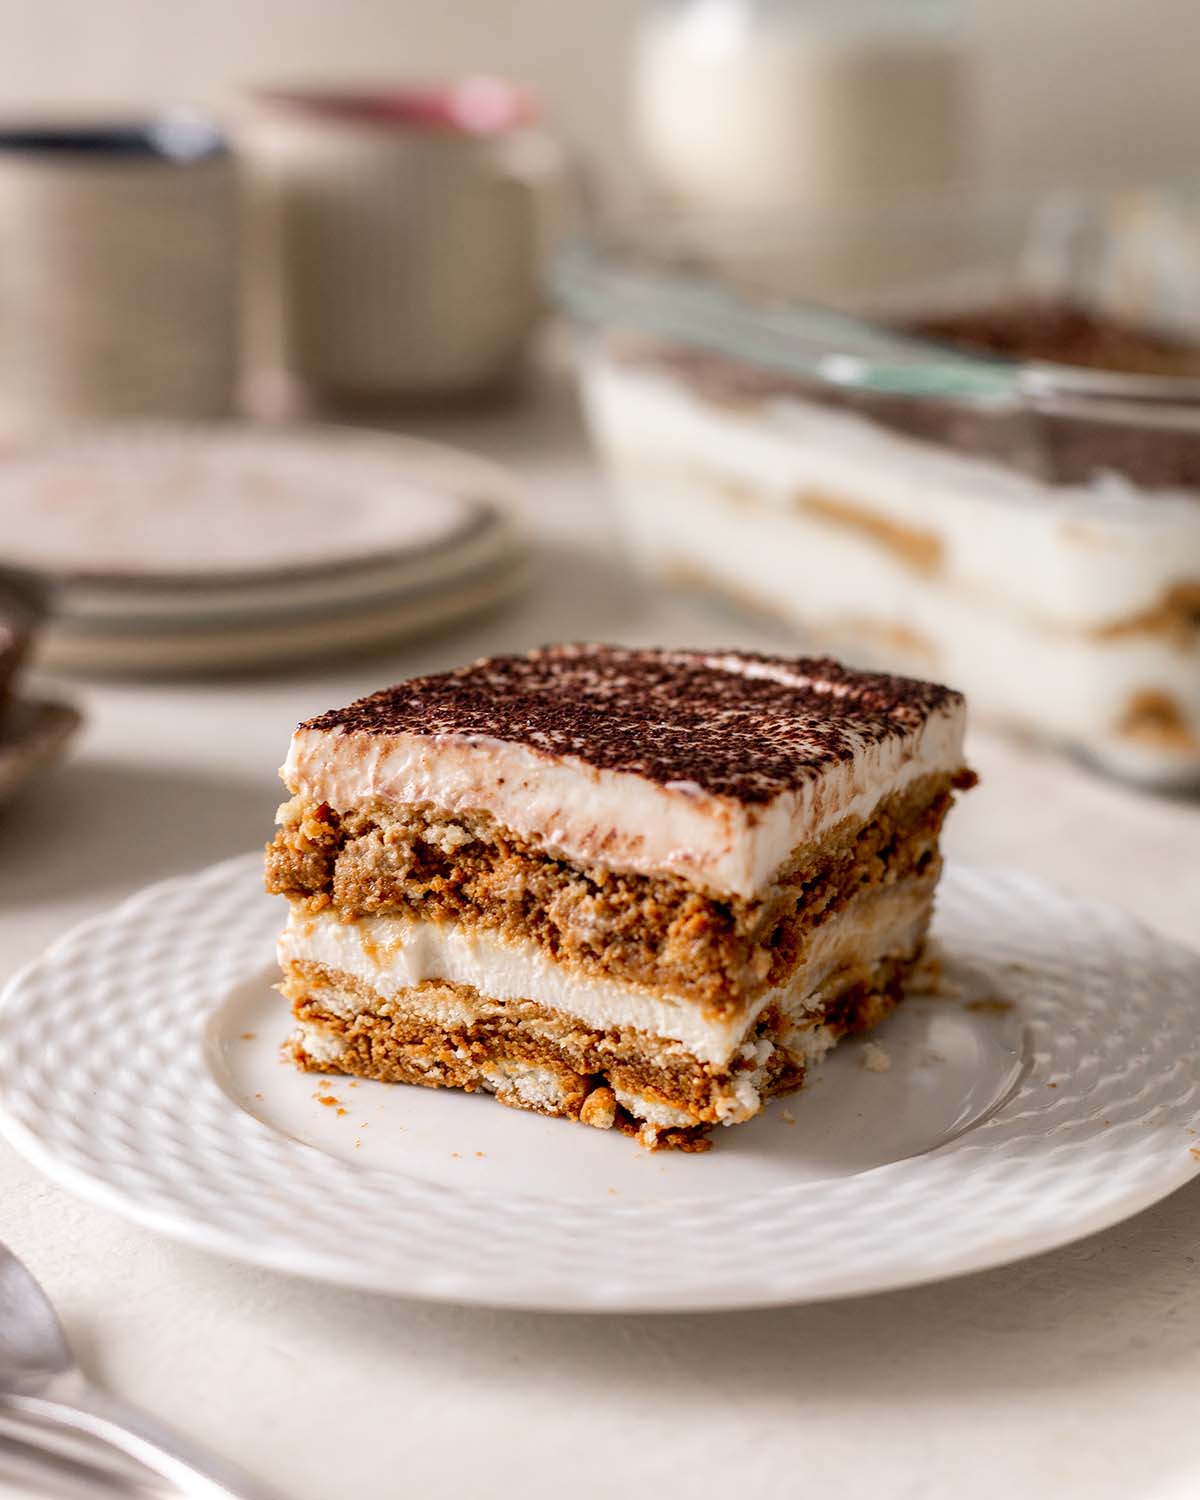 photo of vegan tiramisu on a white plate, topped with cocoa powder. The creamy filling is made with silken tofu and cocoa, creating a delicious and healthy dessert that's perfect for chocolate lovers.